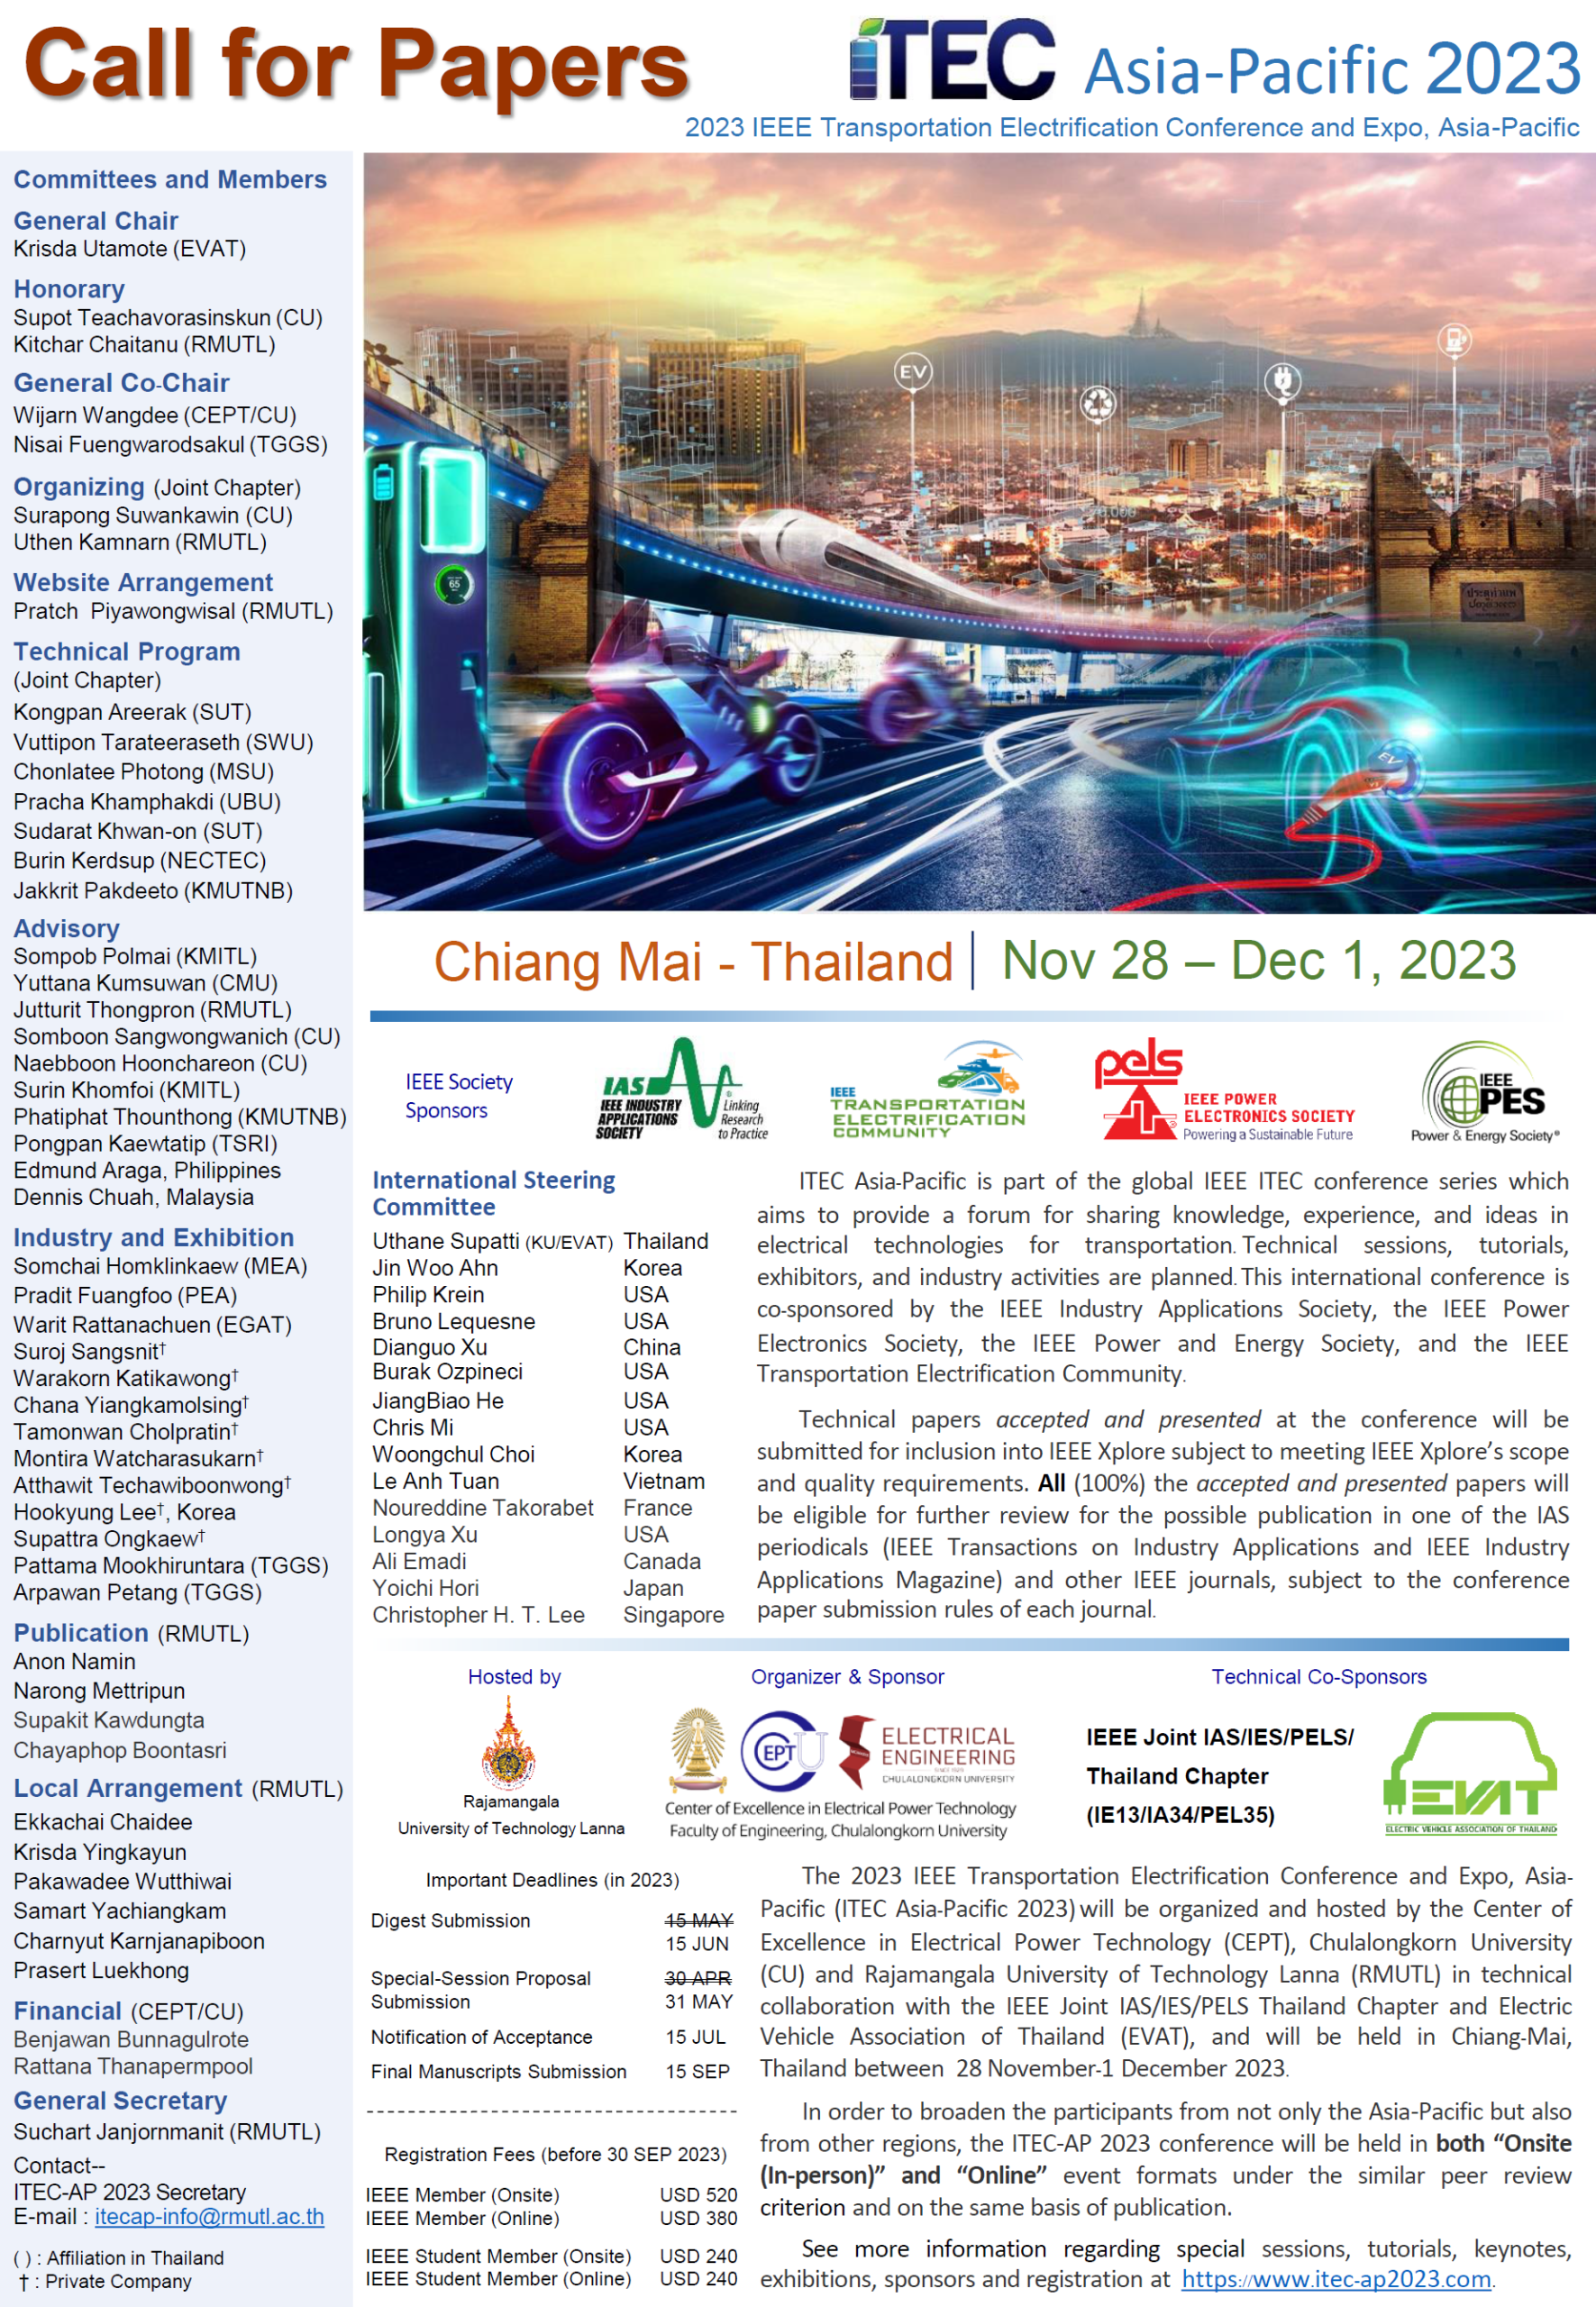 :) Call for Paper: "2023 IEEE Transportation Electrification Conference and Expo, Asia-Pacific"